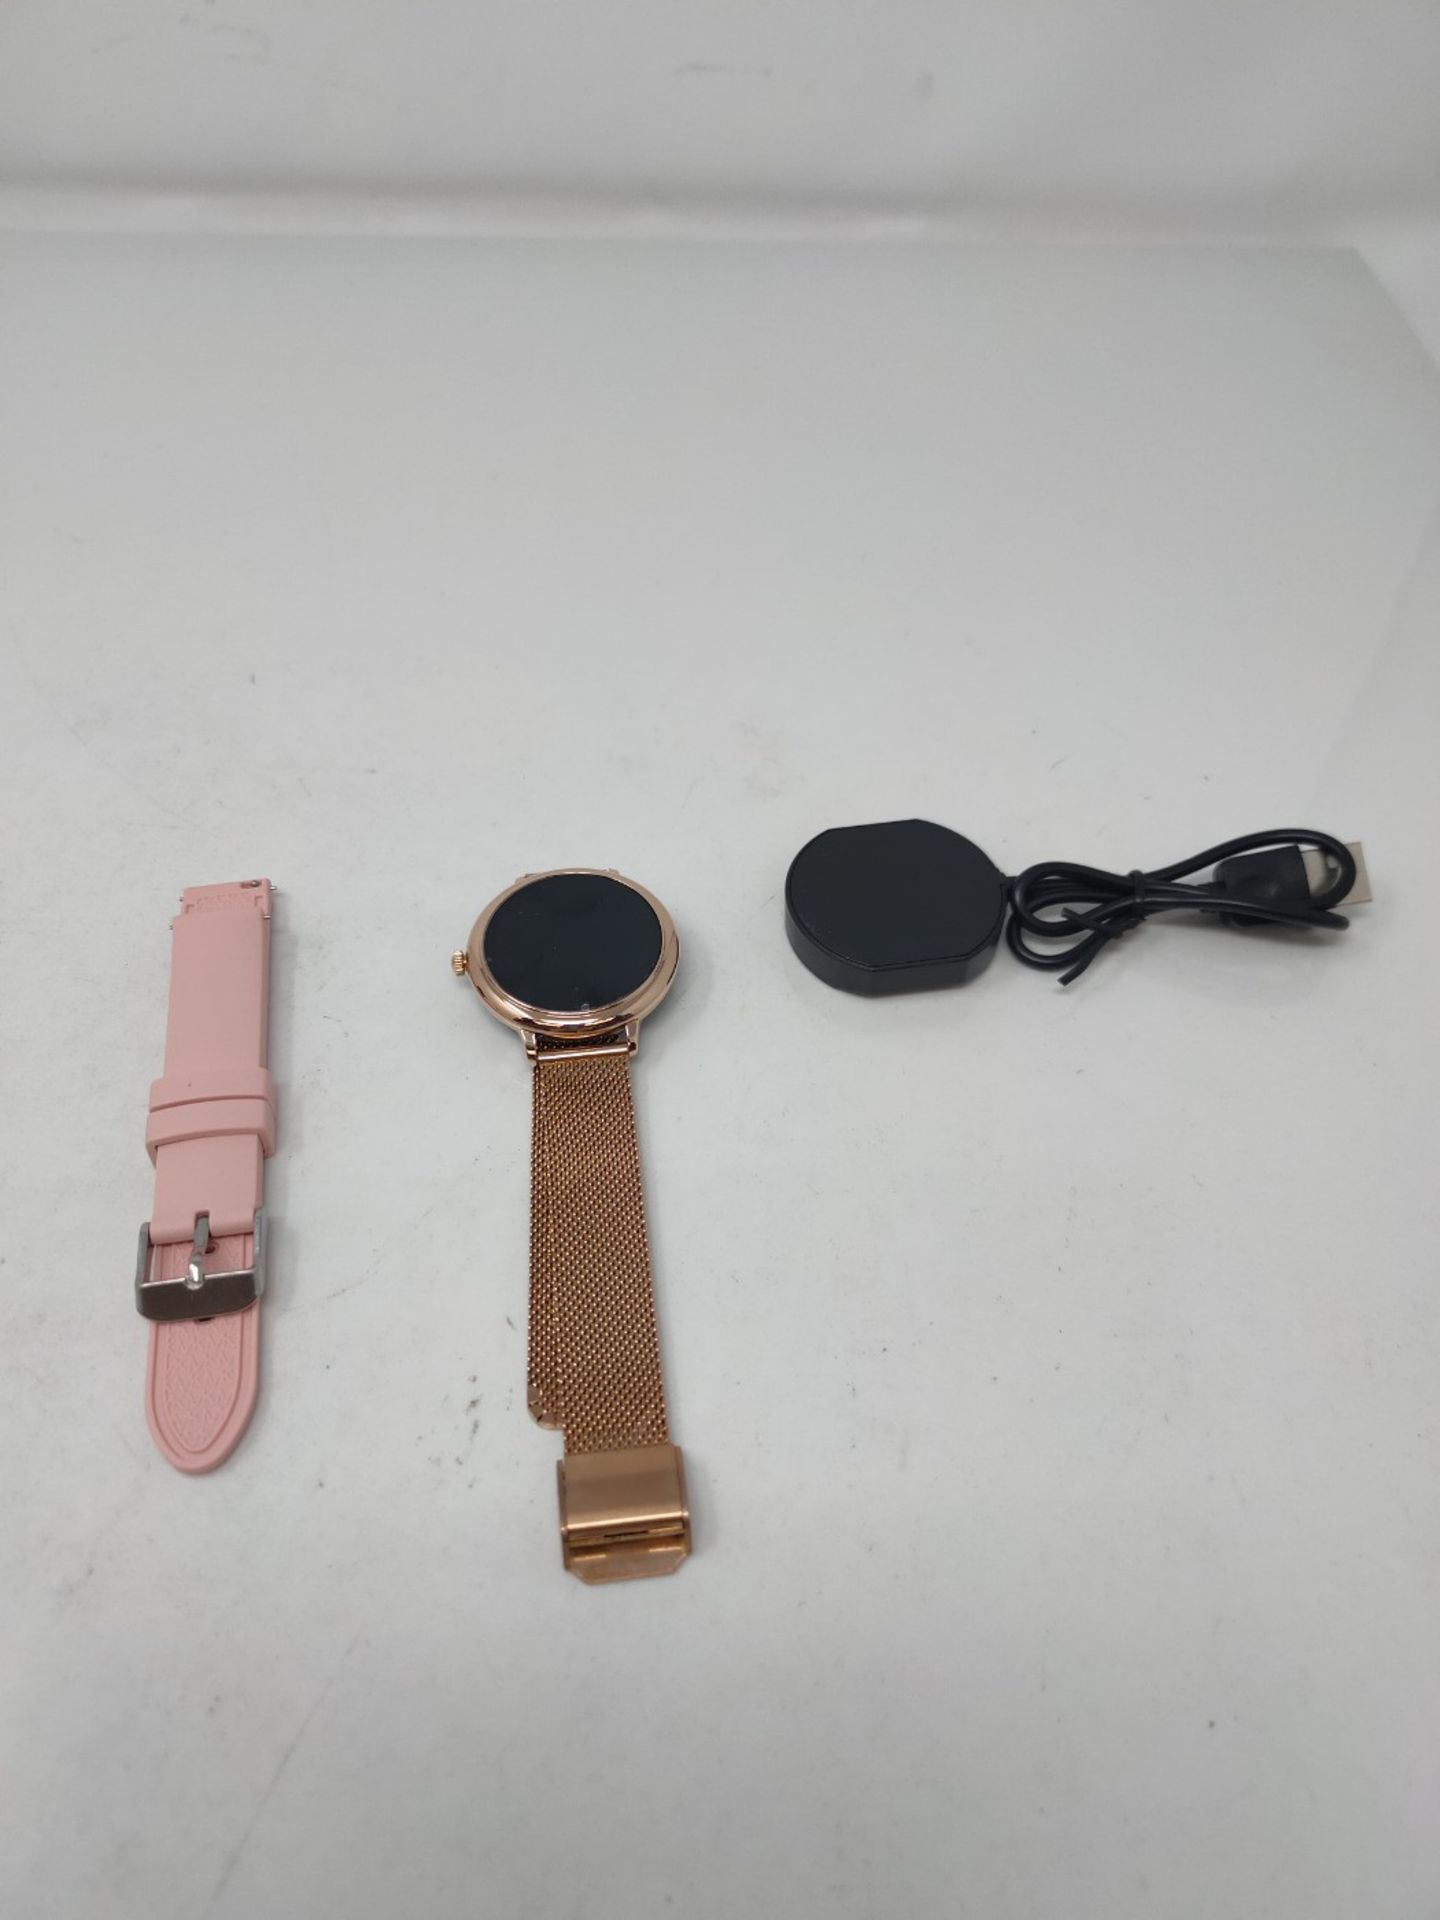 AIMIUVEI Women's Connected Watch, IP67 Waterproof Fitness Sport Smartwatch with Women' - Image 3 of 3